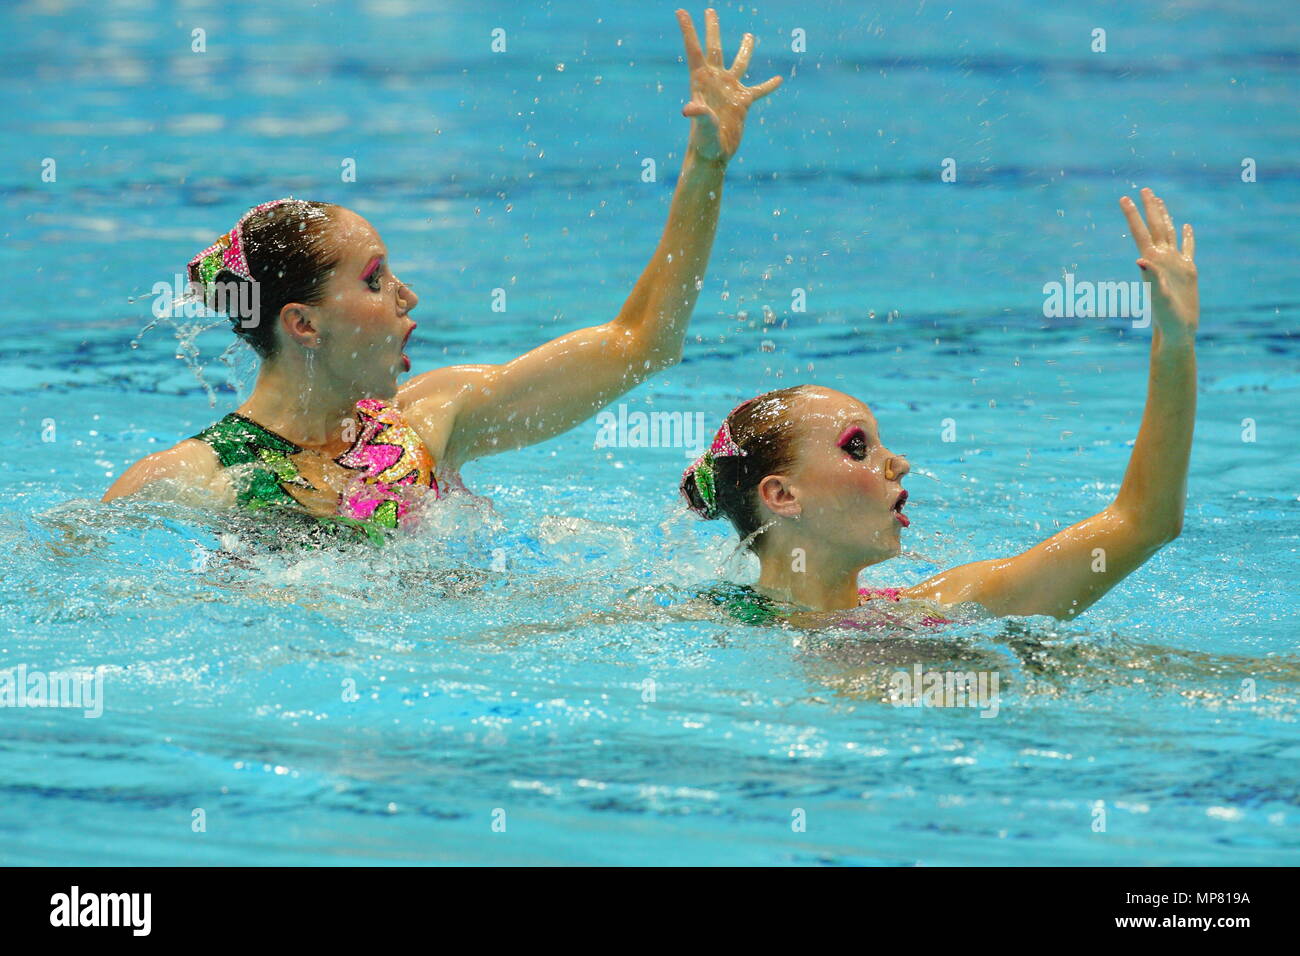 The Duets Team from Israel GLOUSHKOV Anastasia and YOFFE Inna during the Free Routine of the Fina Synchronised Swimming event at the Aquatic Centre London Olympic Park 22 April 2012 --- Image by © Paul Cunningham Stock Photo